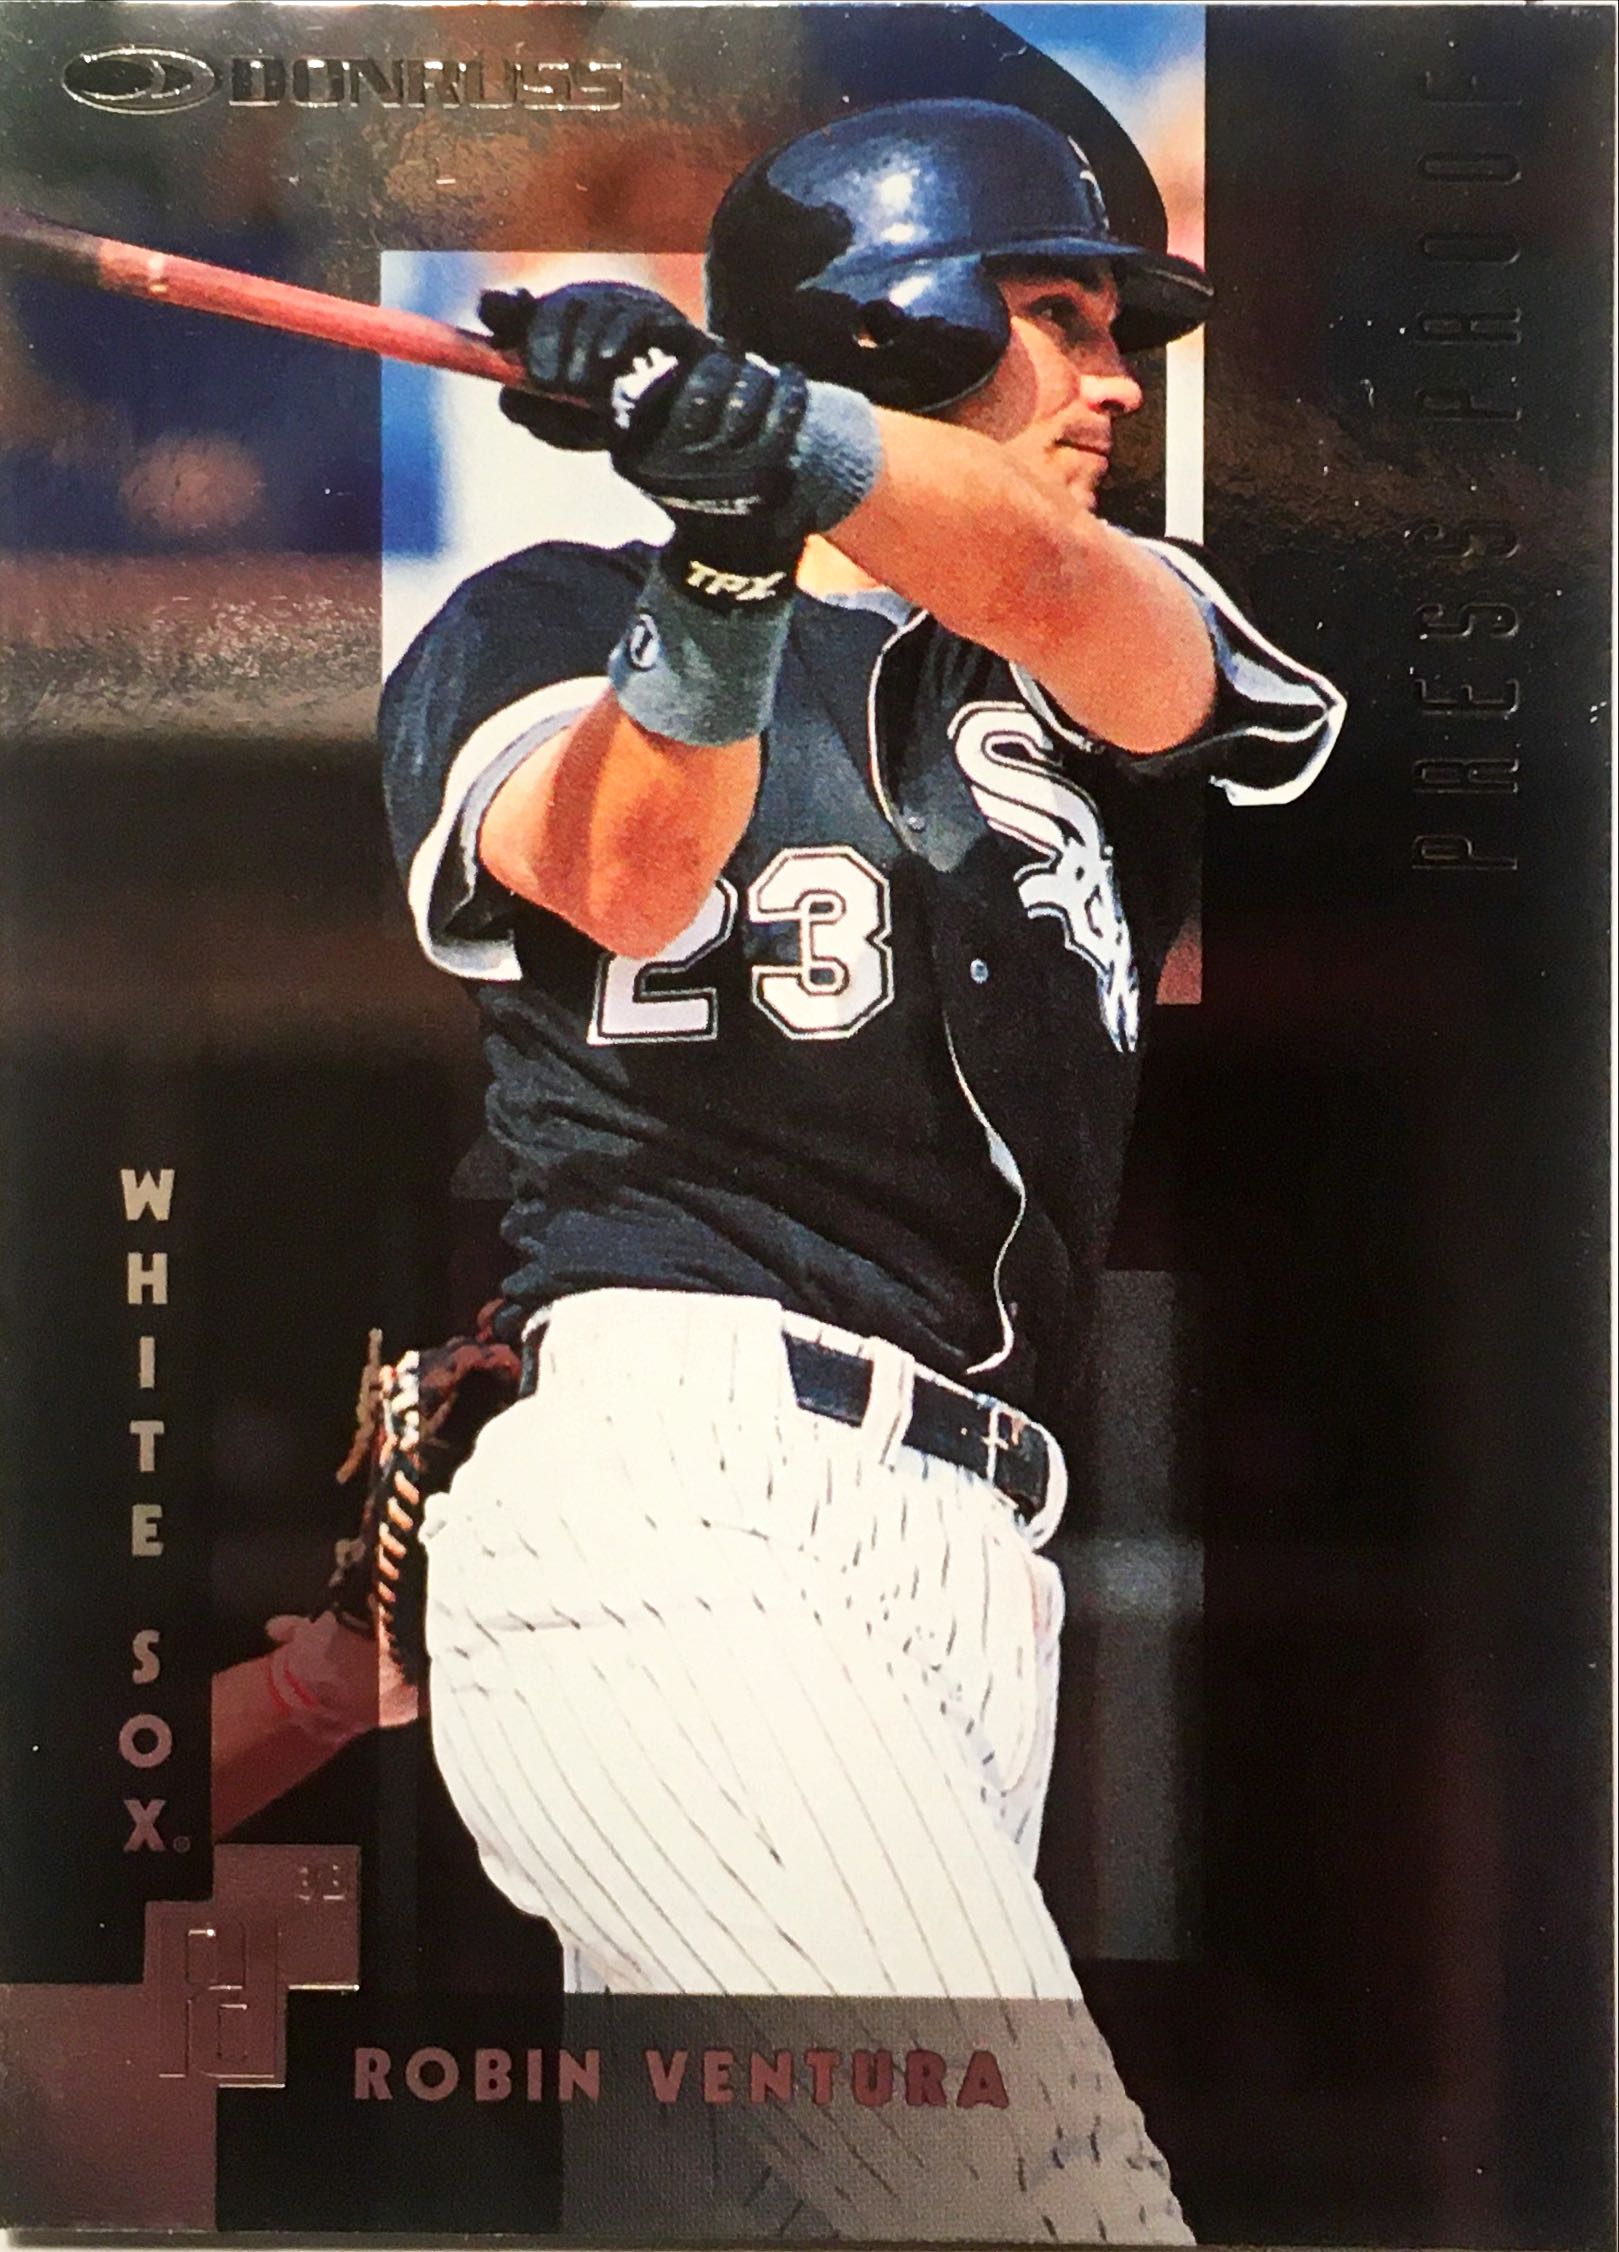 1997 Donruss Silver Press Proofs 22 front image